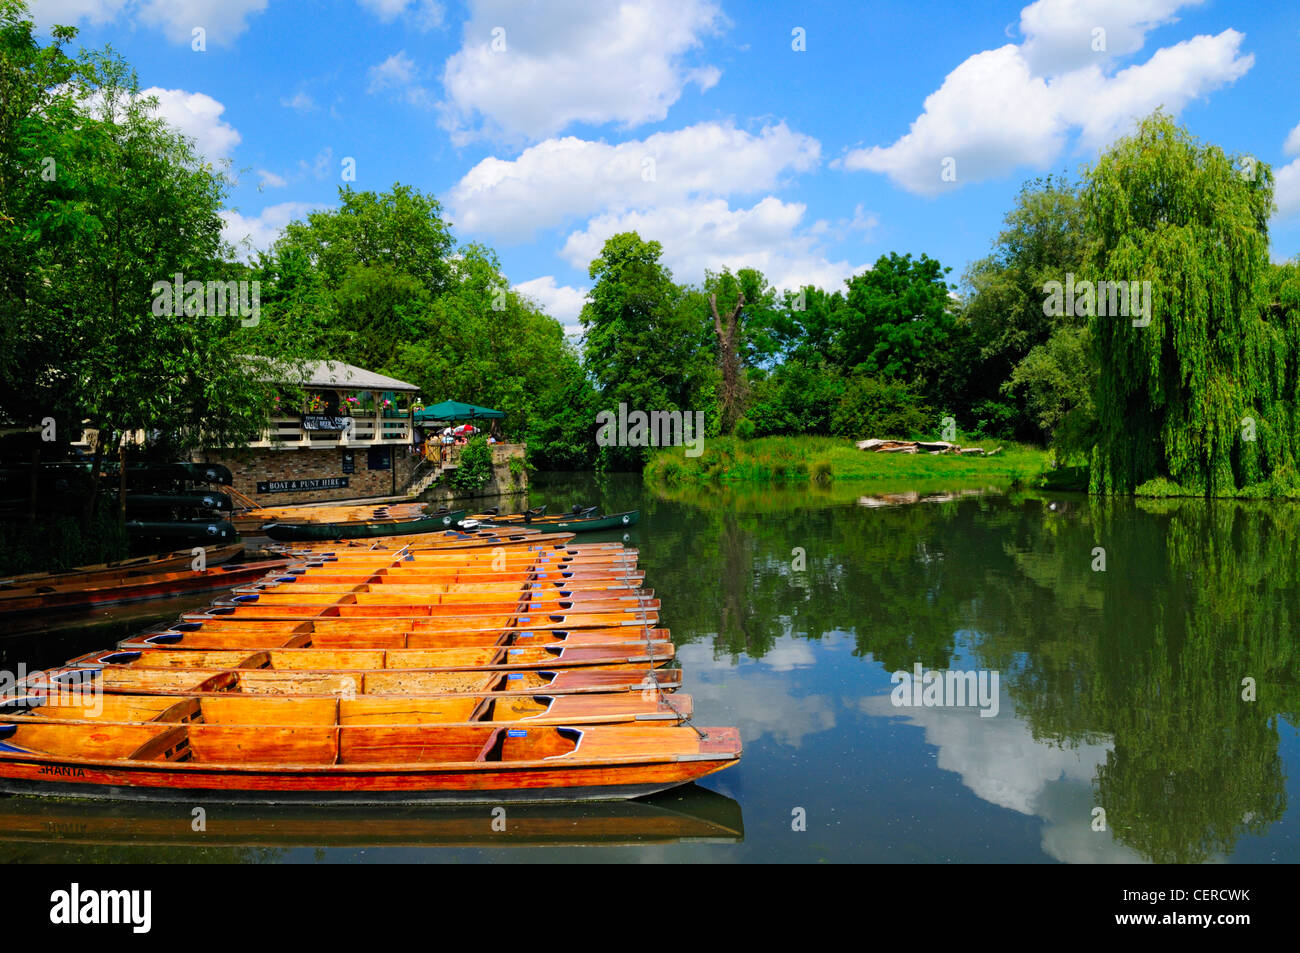 Boats and punts for hire on the Granta River outside The Granta Pub. Stock Photo